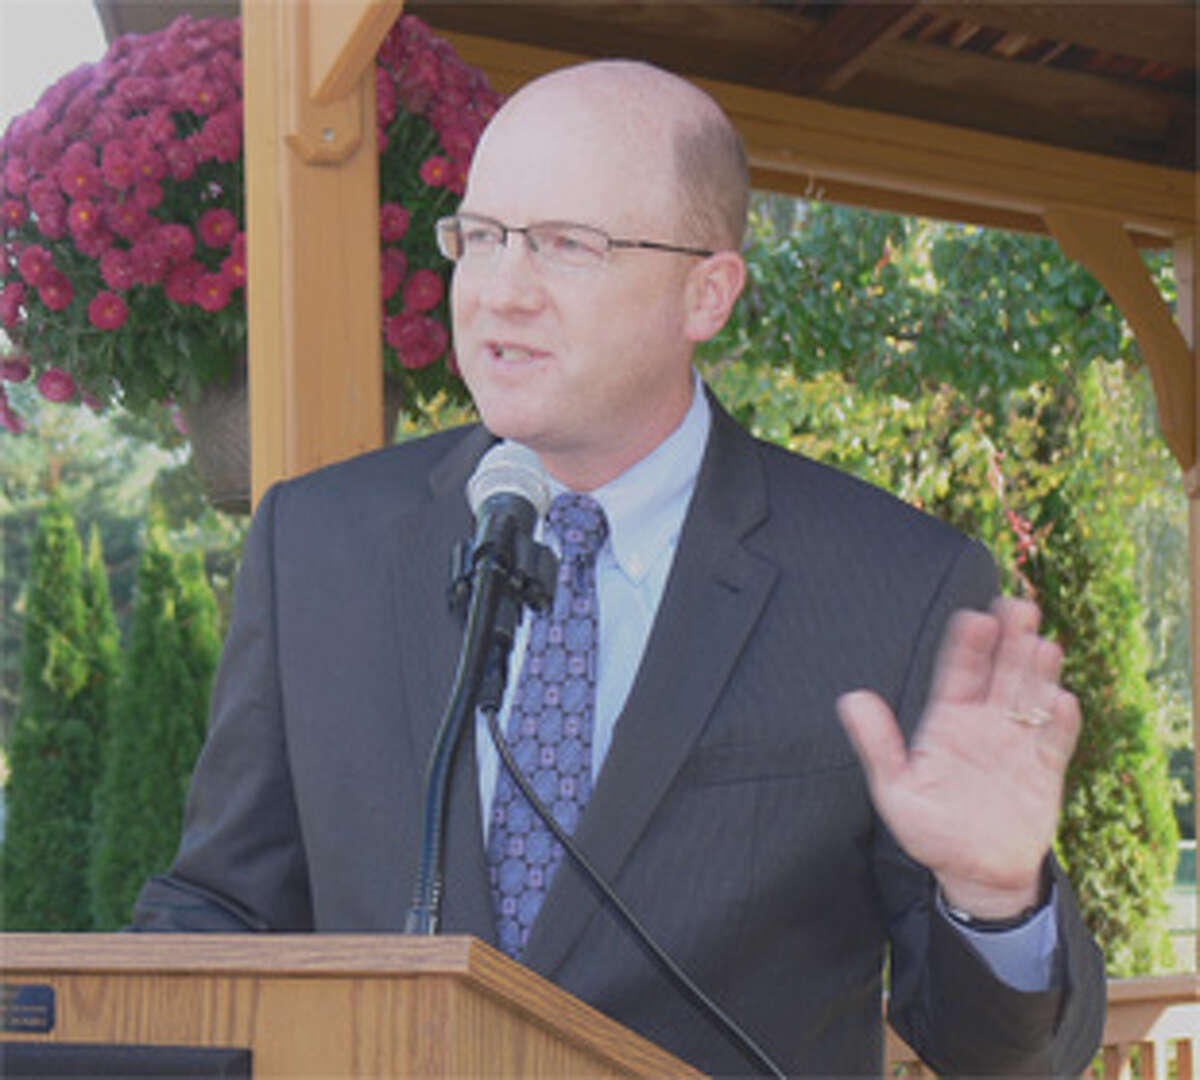 David M. Lawlor, president and CEO of United Methodist Homes, speaks at the event to celebrate renovations made to the Bishop Wicke Center in Shelton.